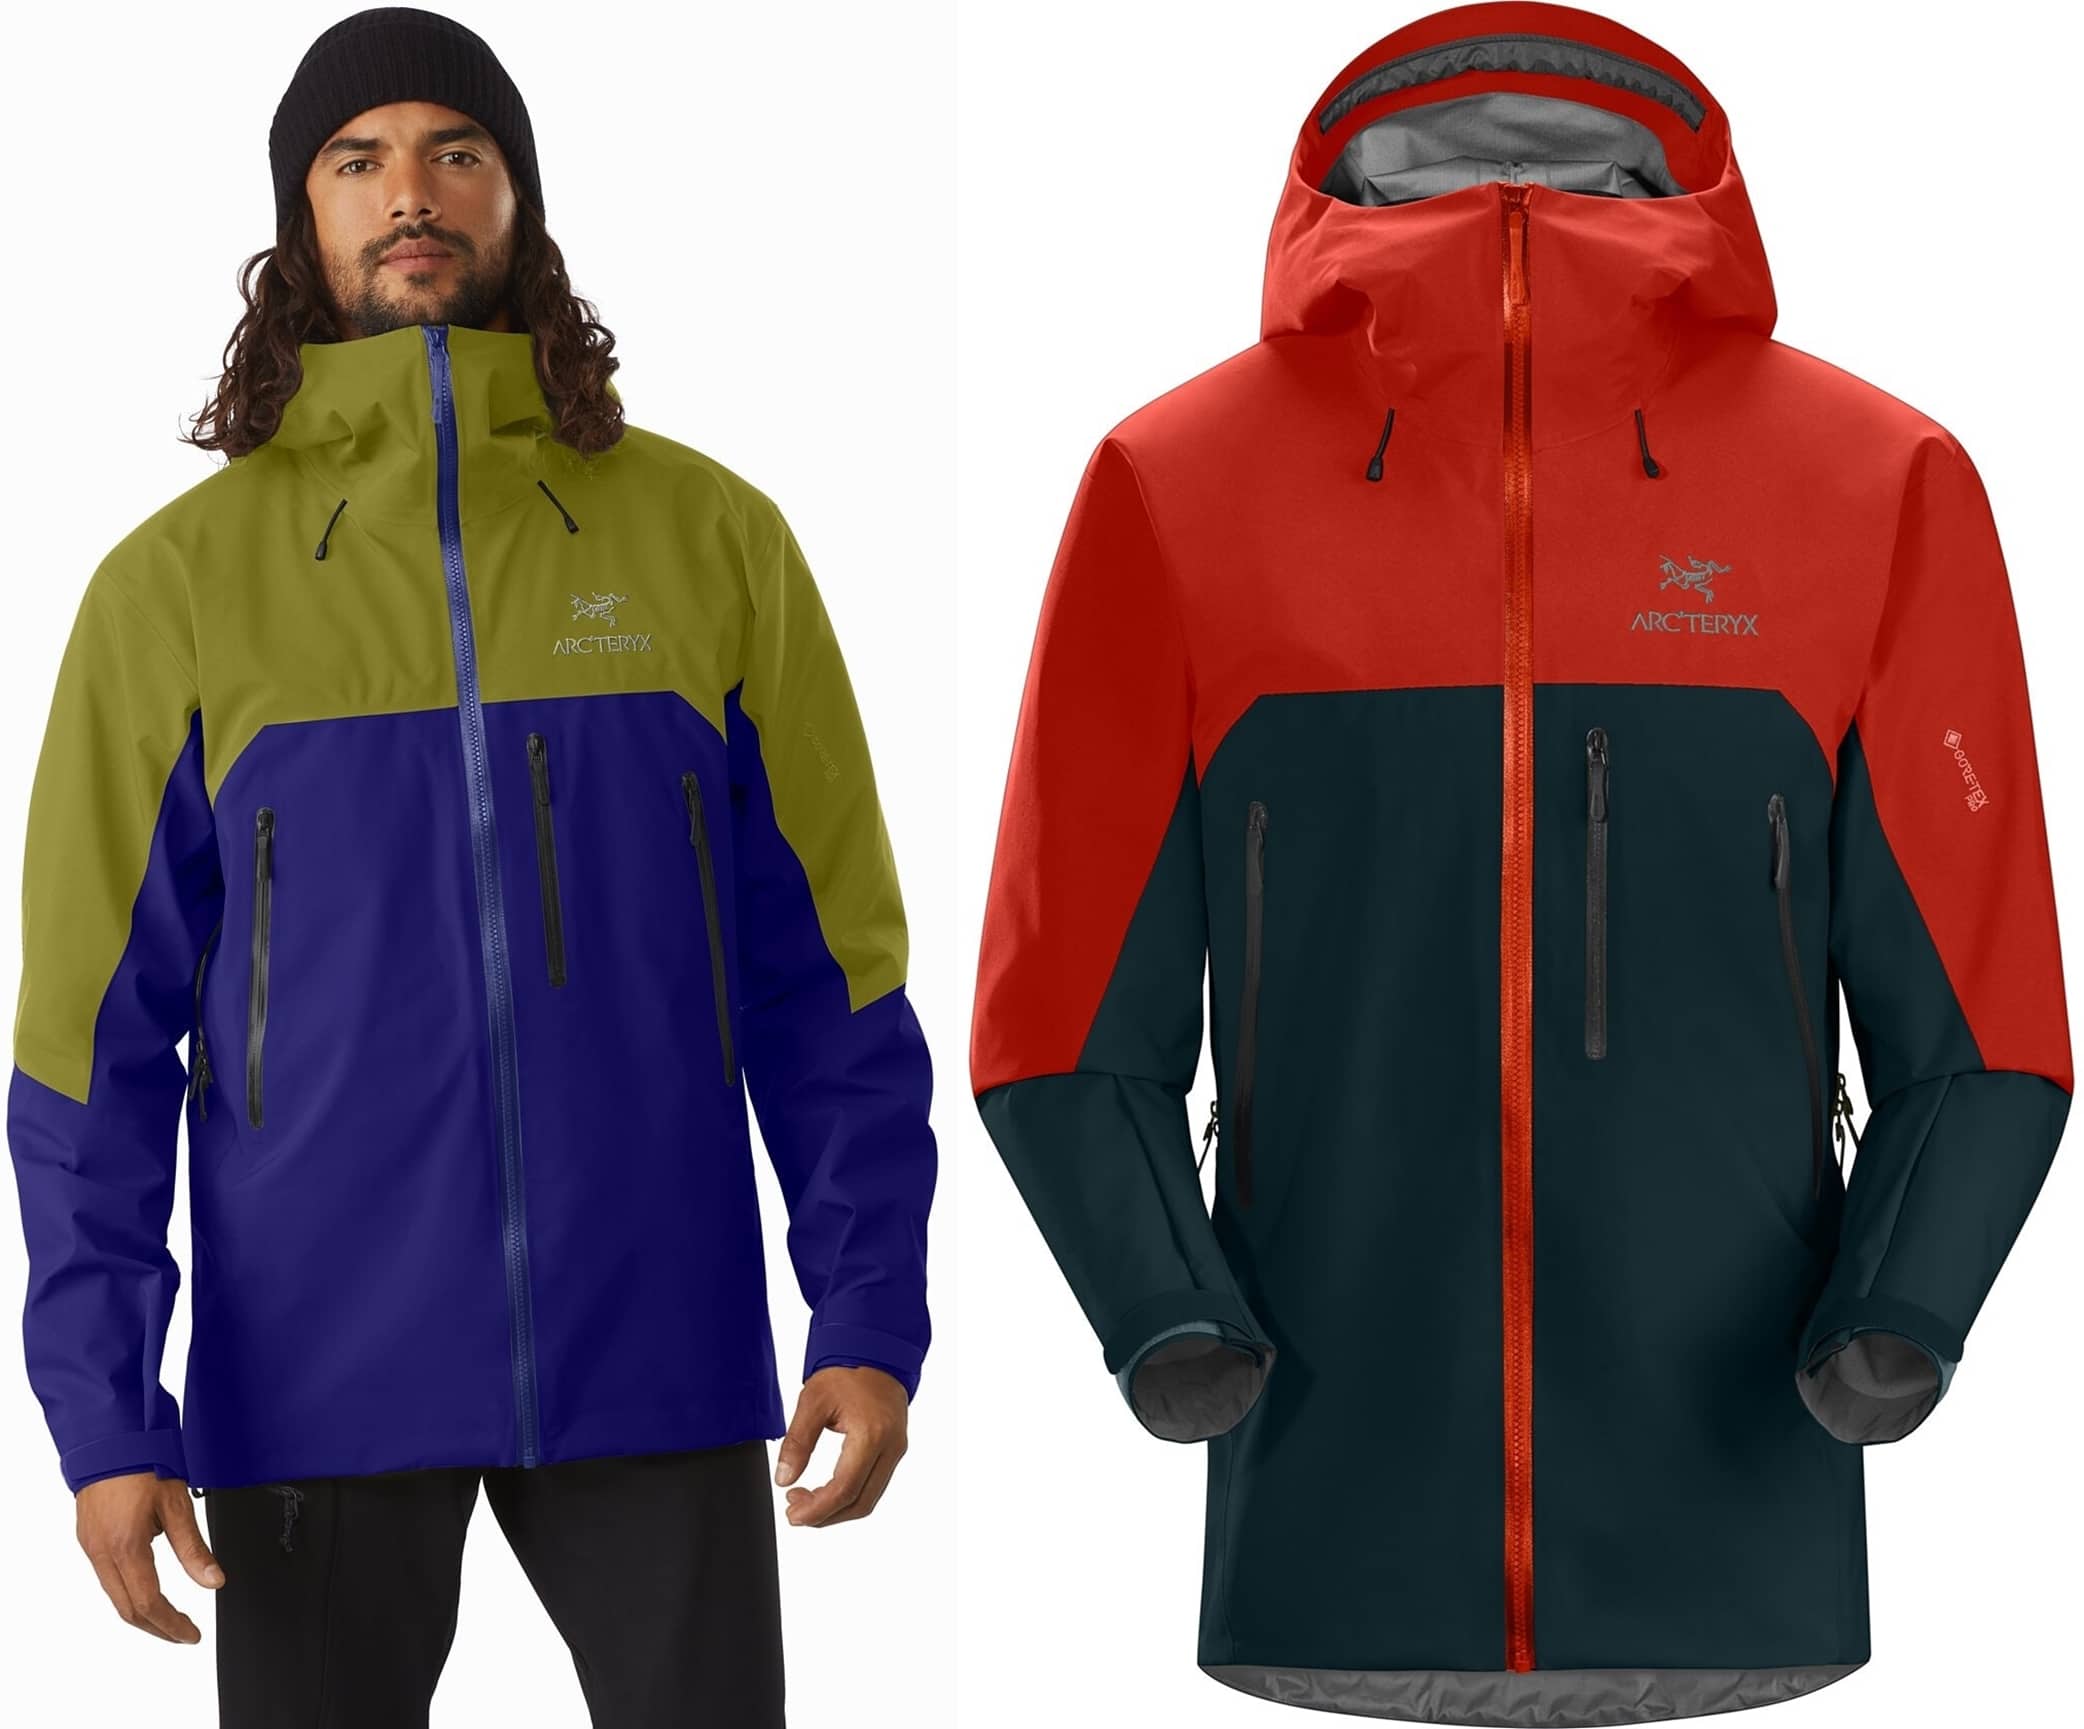 Durable, highly versatile GORE-TEX PRO jacket for severe alpine conditions